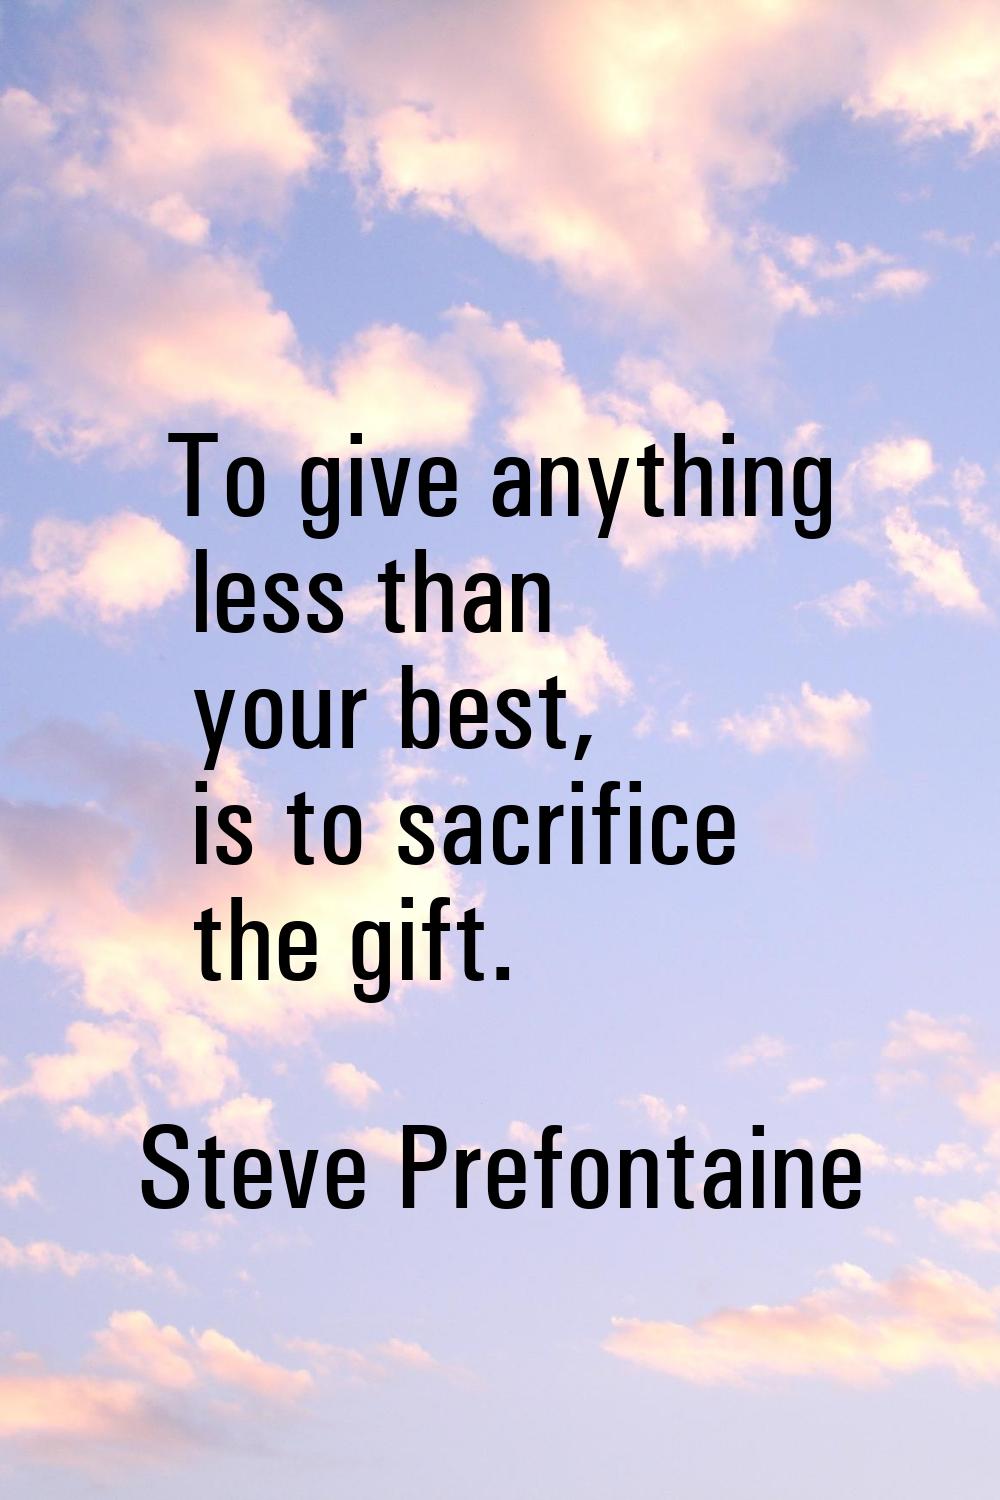 To give anything less than your best, is to sacrifice the gift.